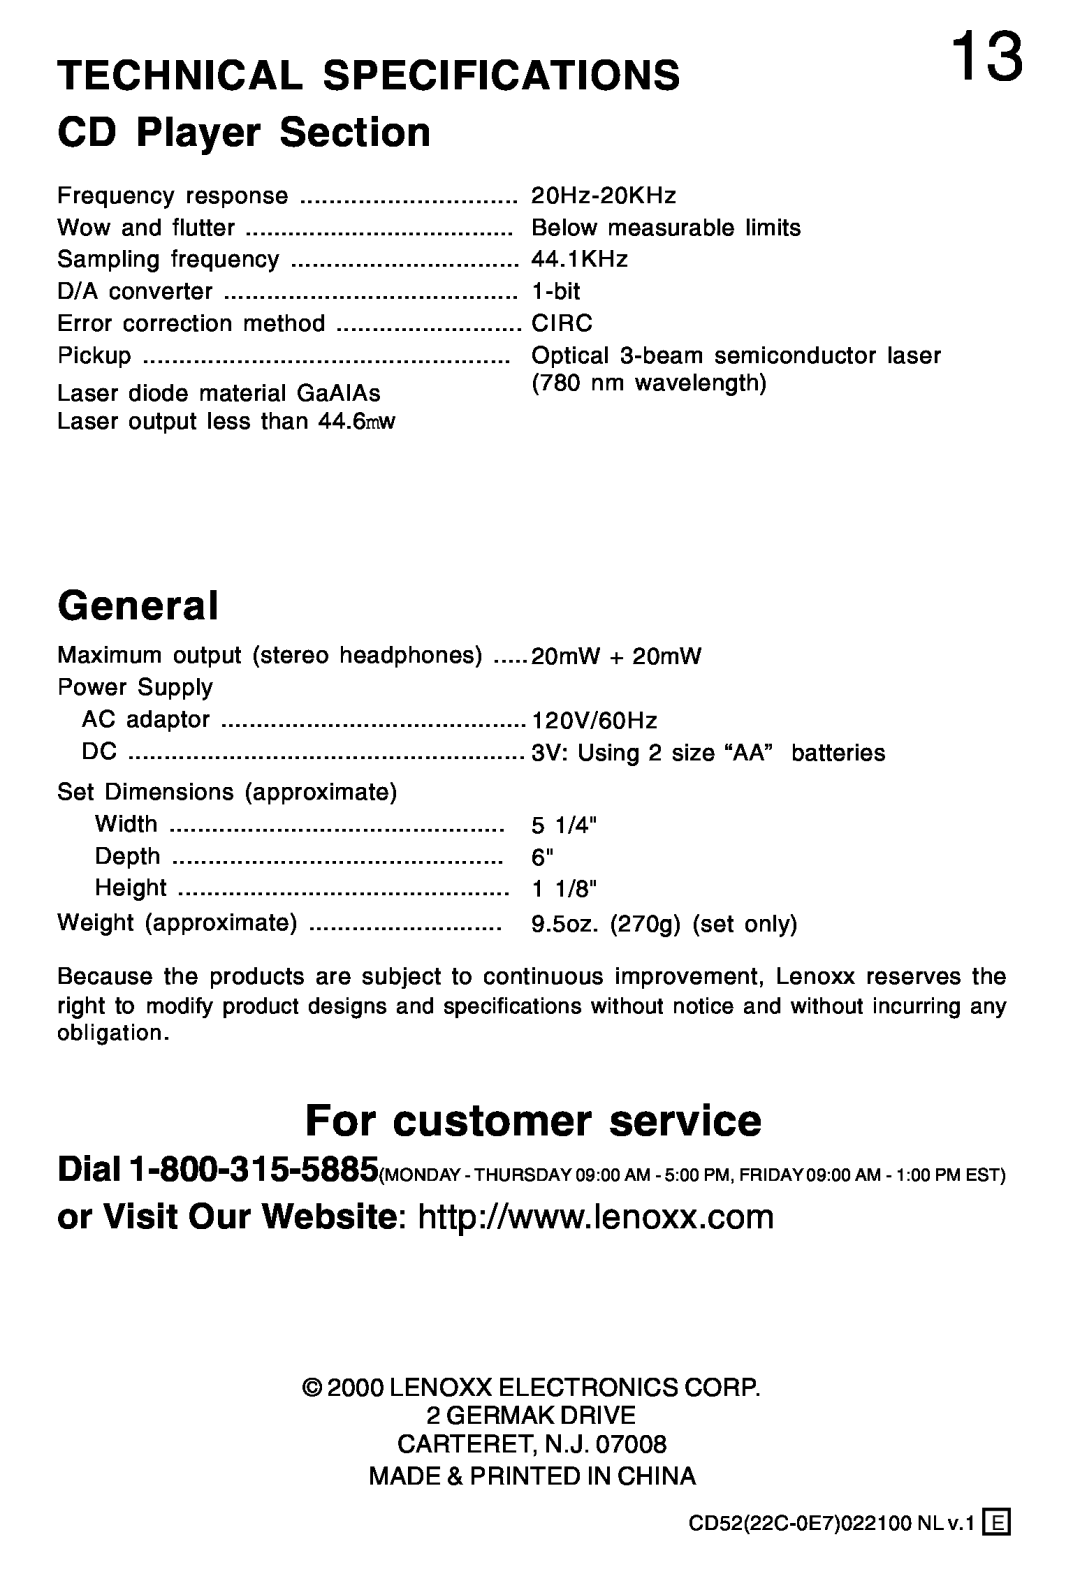 Lenoxx Electronics CD-52 manual Technical Specifications, CD Player Section, General, For customer service 